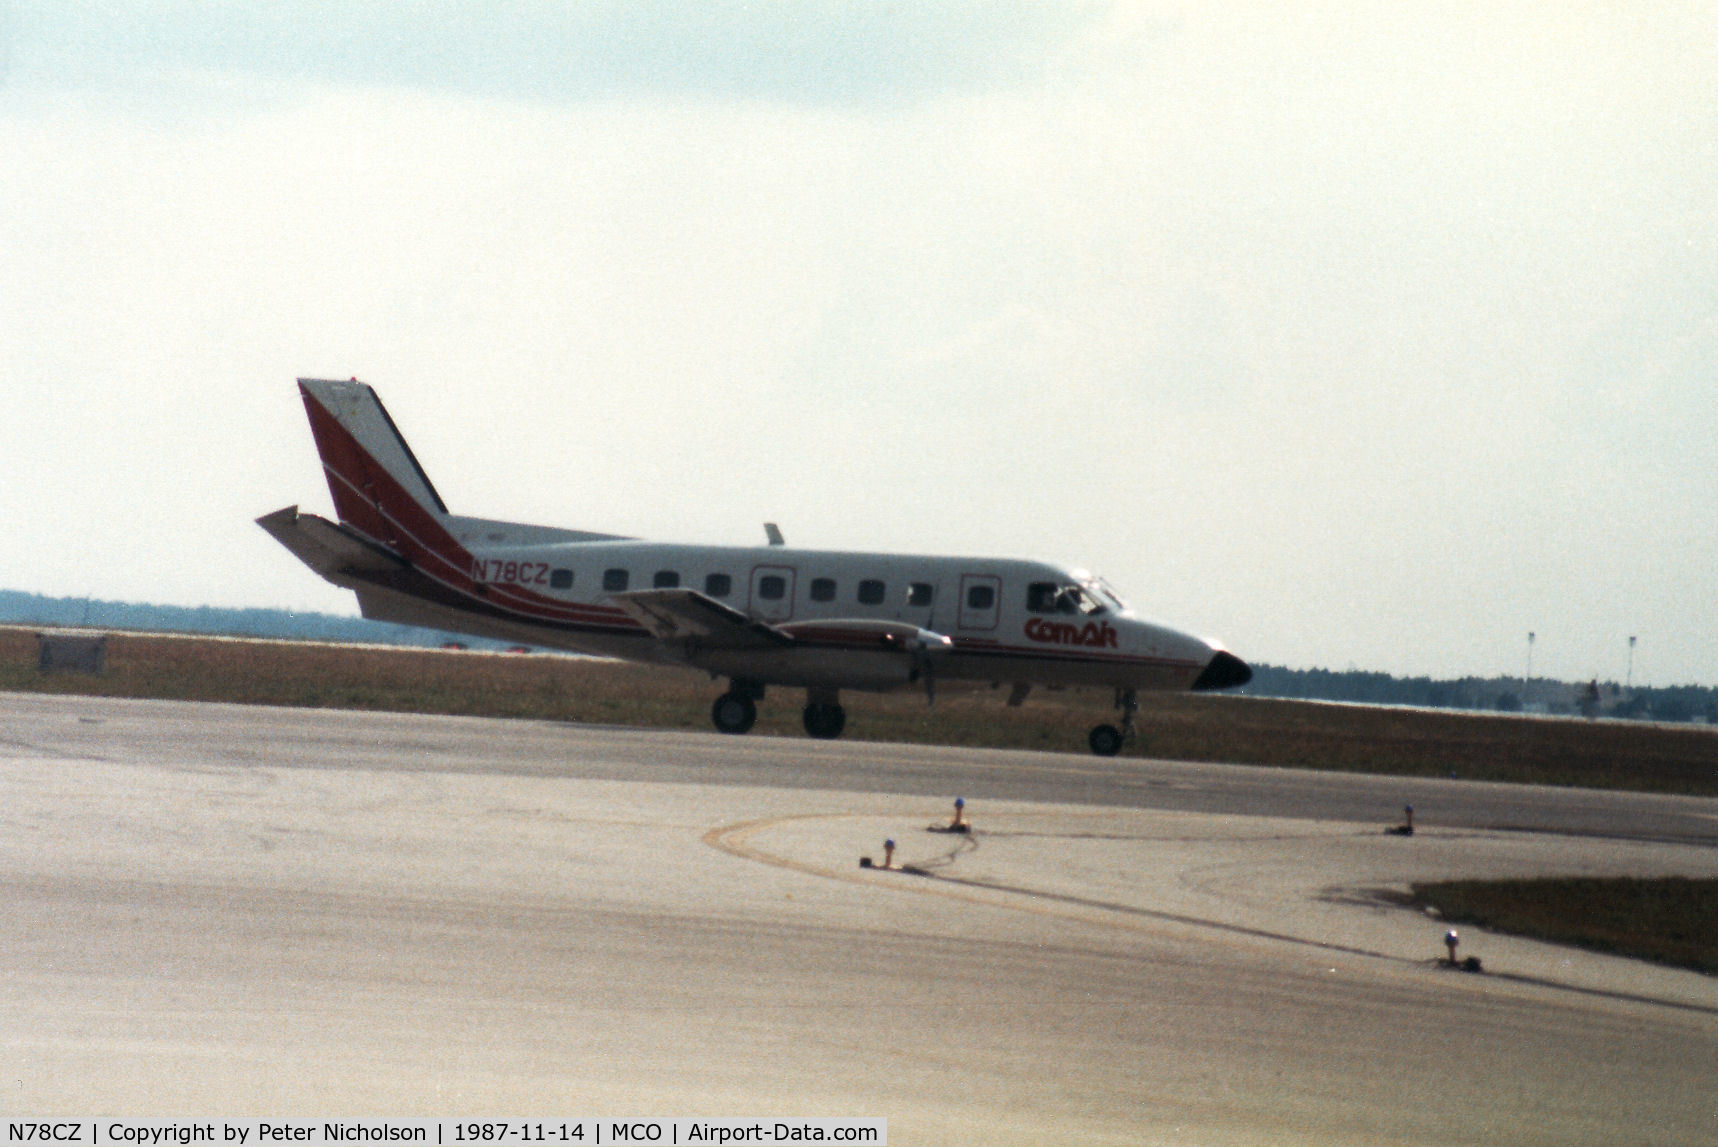 N78CZ, Embraer EMB-110P1 Bandeirante C/N 110358, Embraer Bandeirante of Comair taxying to the active runway at Orlando in November 1987.